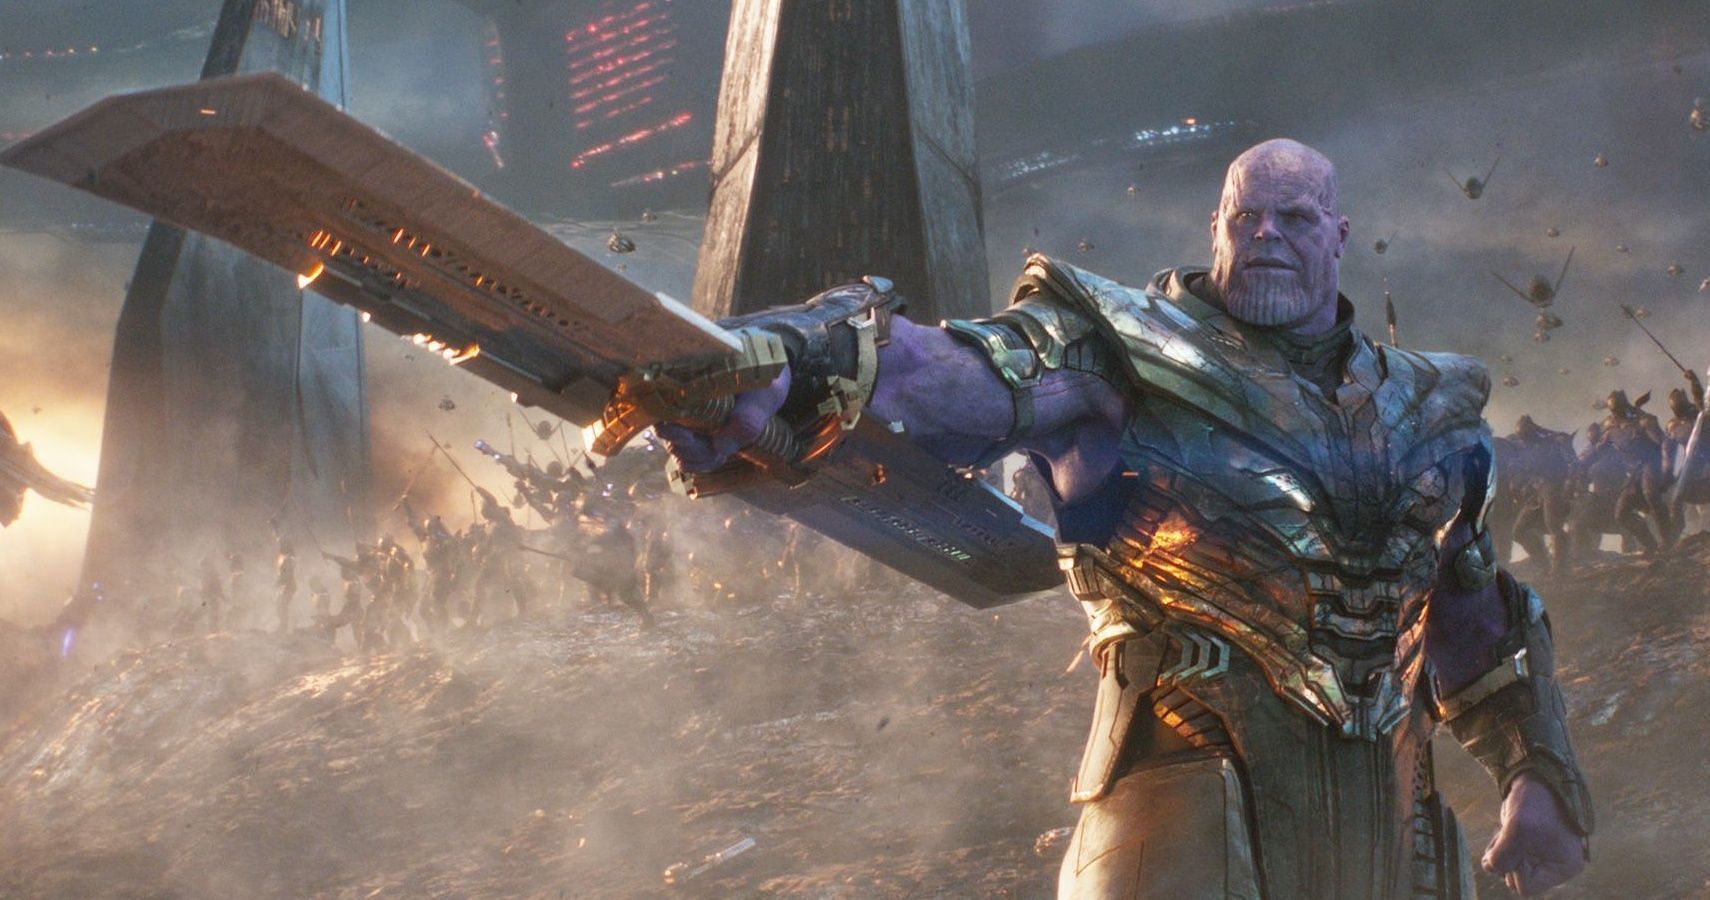 The MCU's incarnation of Thanos is quite muscular and well-built. (Image via Disney)